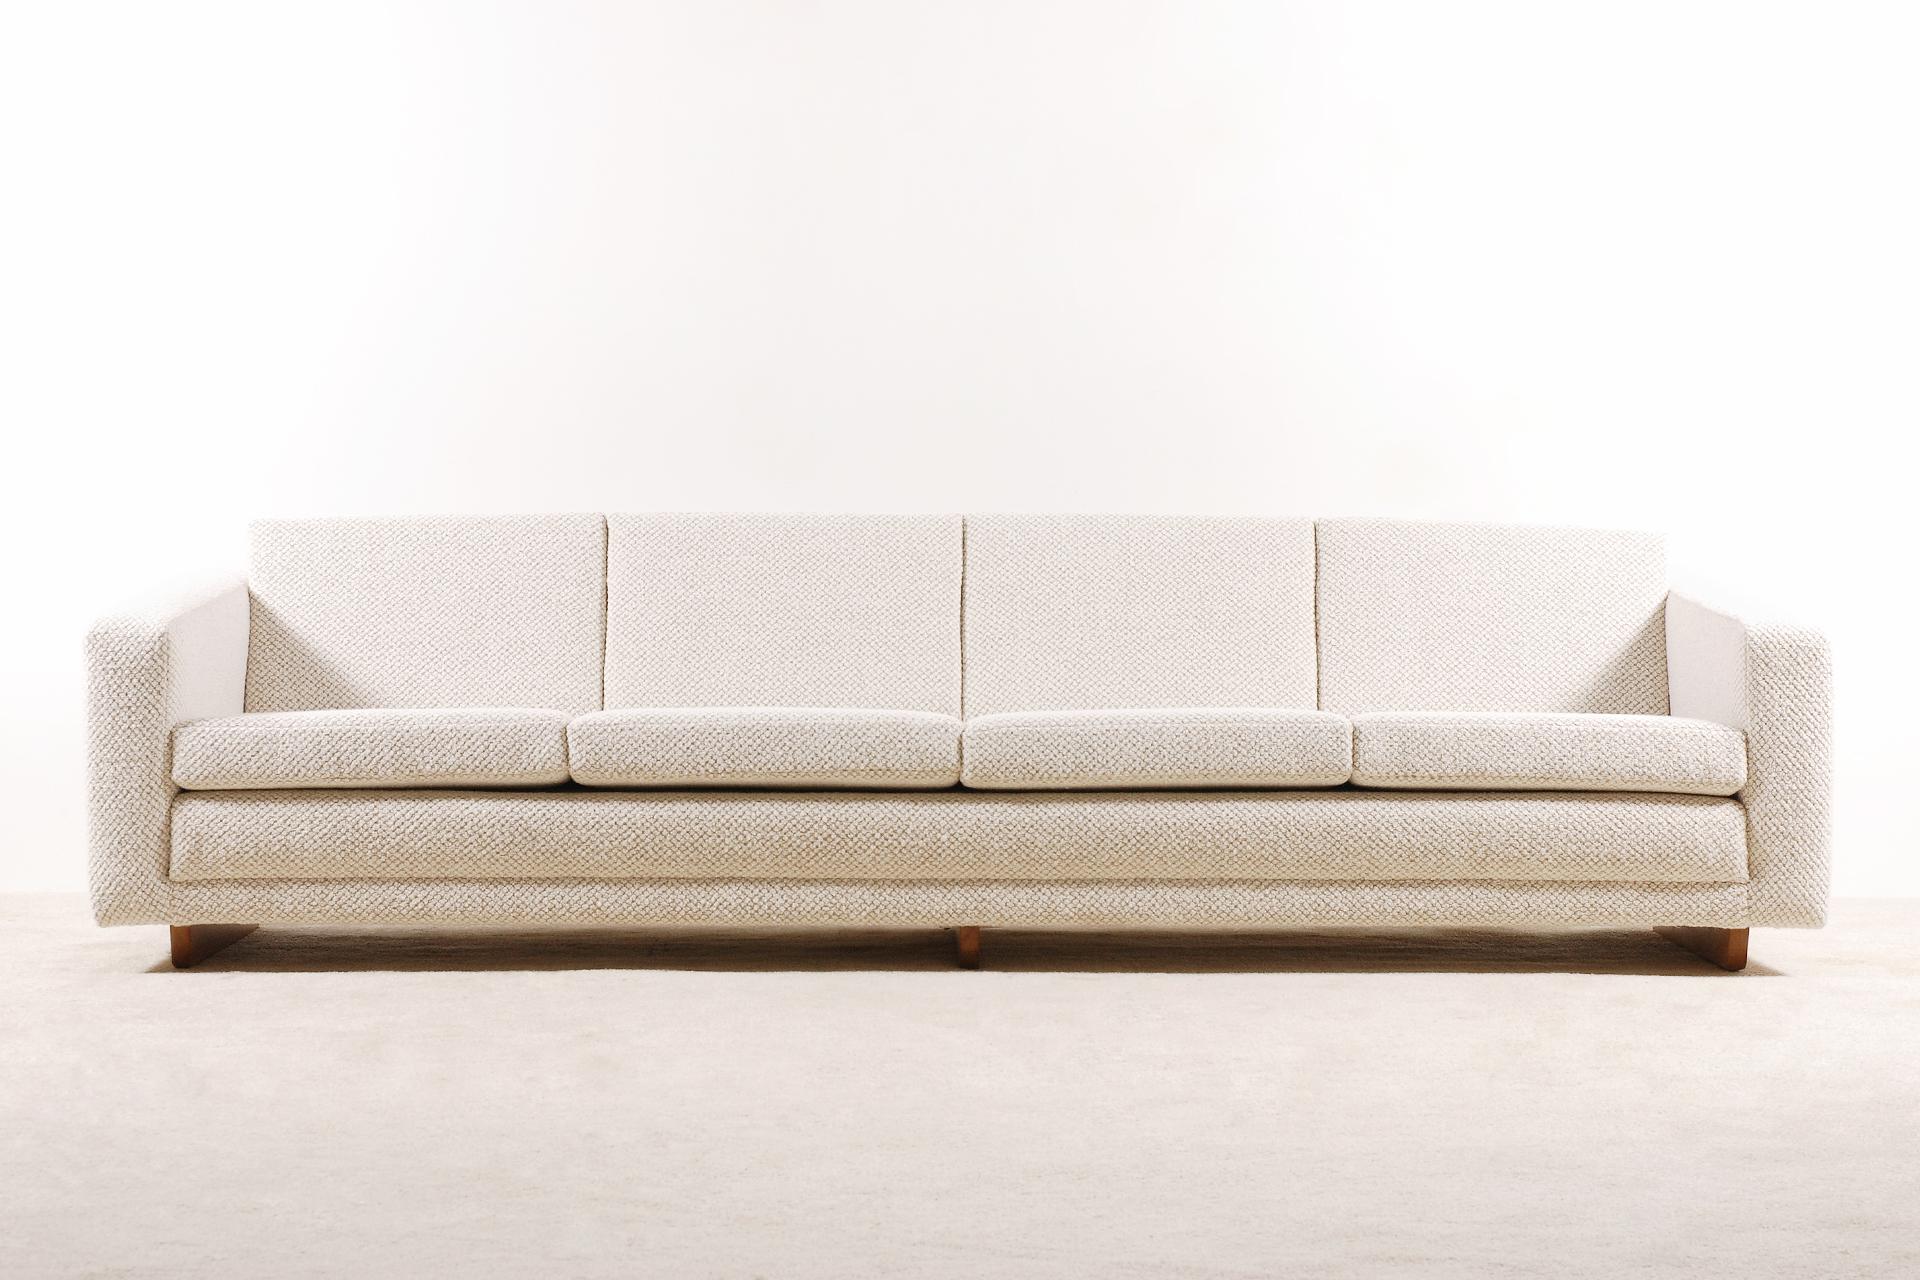 Elegant four-seat sofa model 205 designed by the Danish designer Børge Mogensen and manufactured by Fredericia Stolefabrik, 1958.

Perfect lines and proportions.
Extra long sofa.

Newly upholstered with a premium quality wool fabric from the